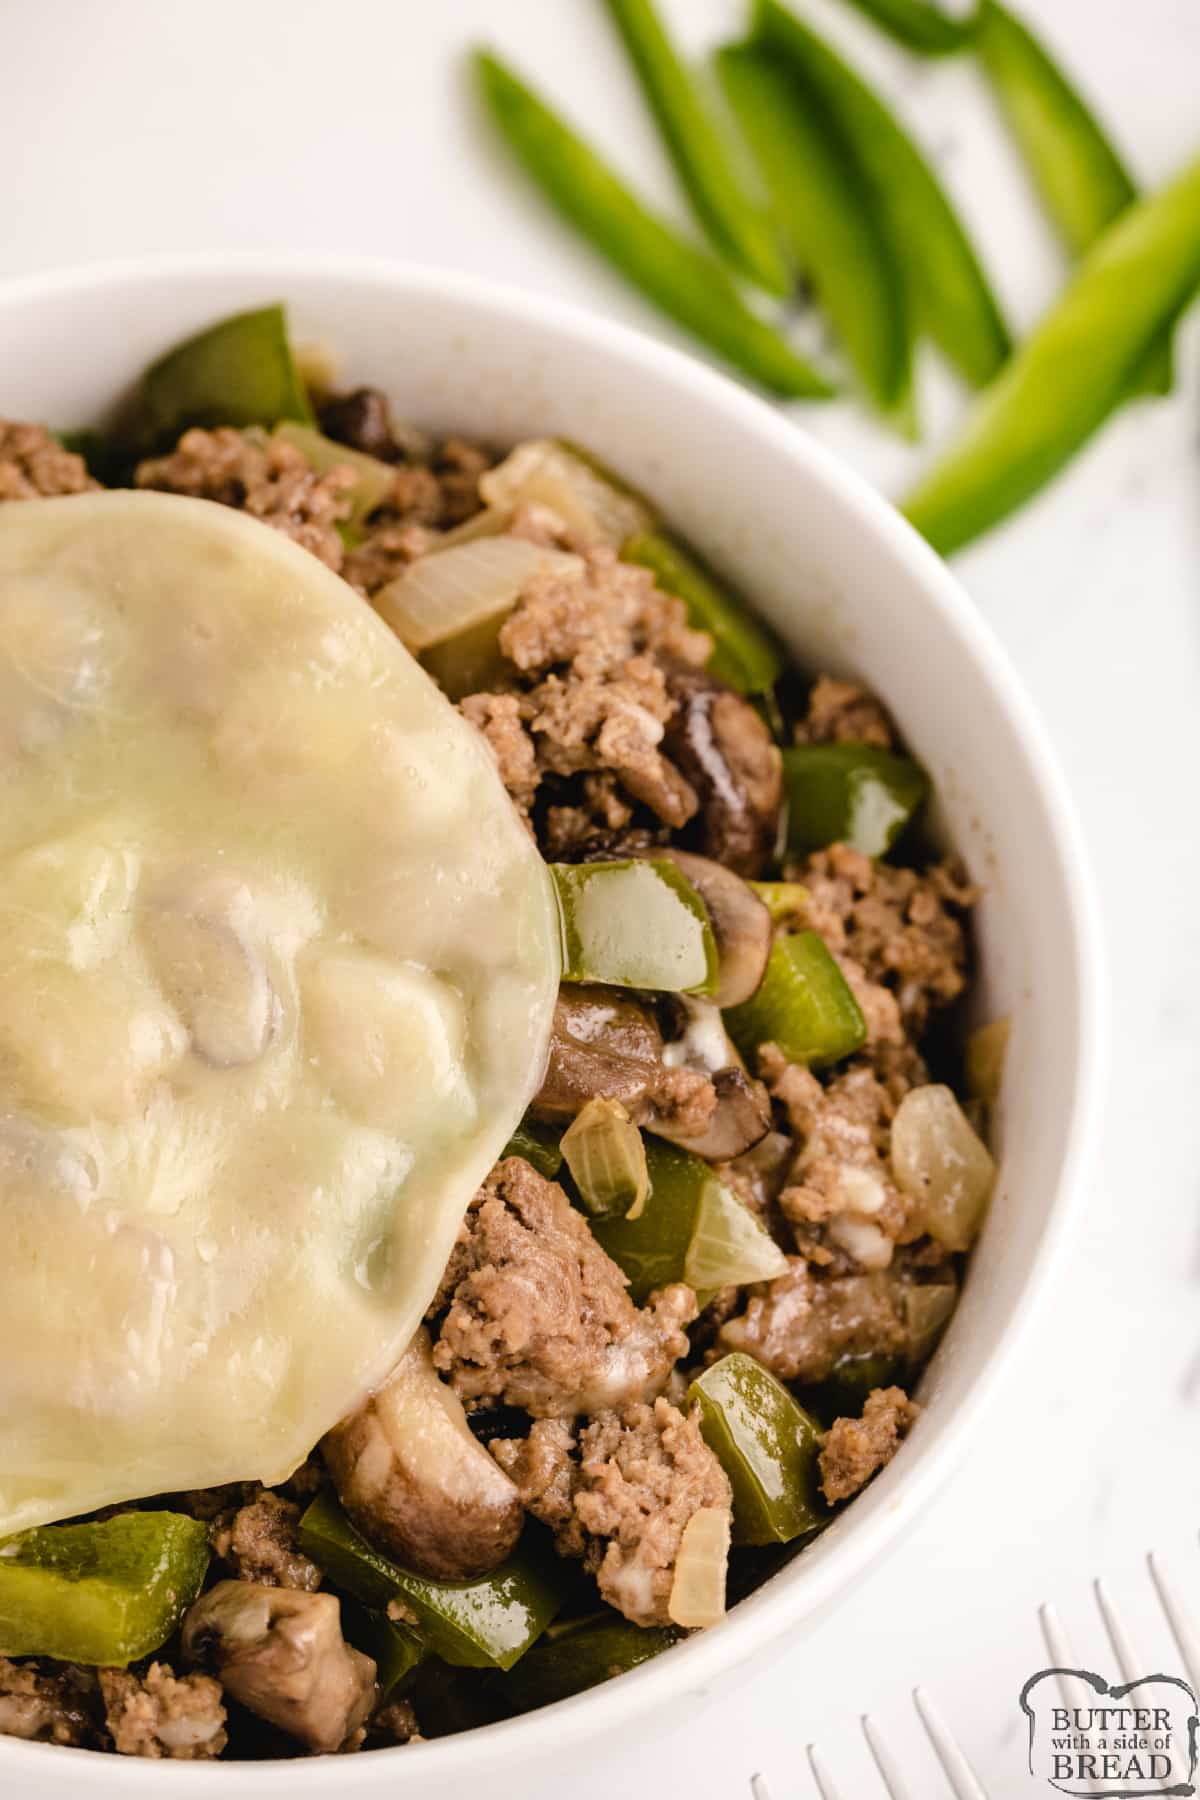 Philly Cheesesteak Bowls made with ground beef, peppers, mushrooms and onions